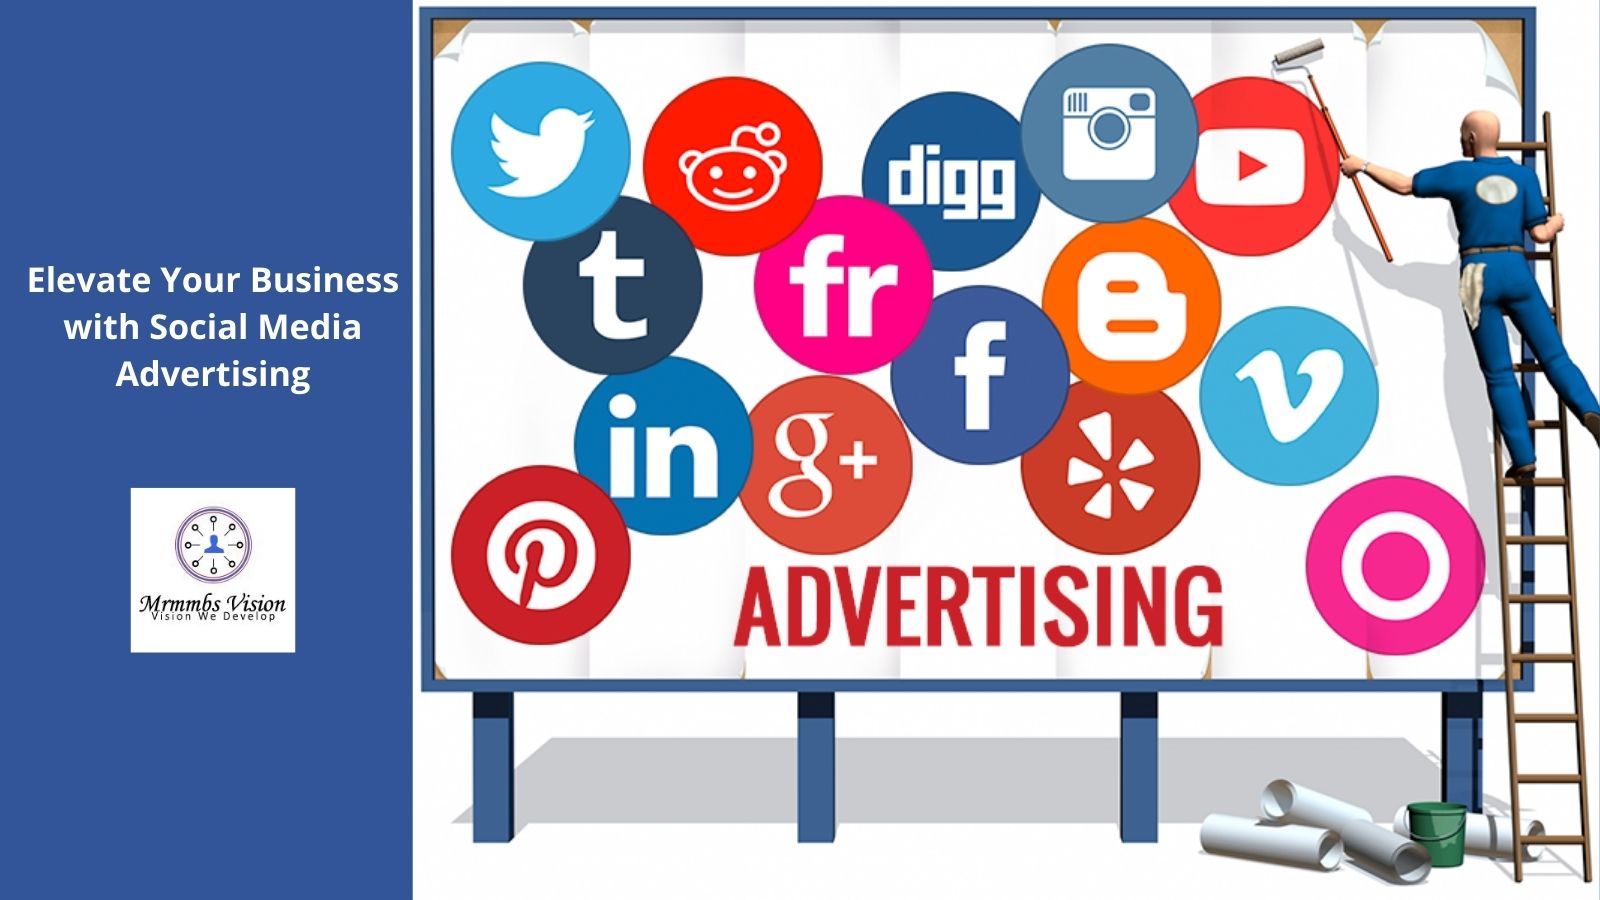 Elevate Your Business with Social Media Advertising                  